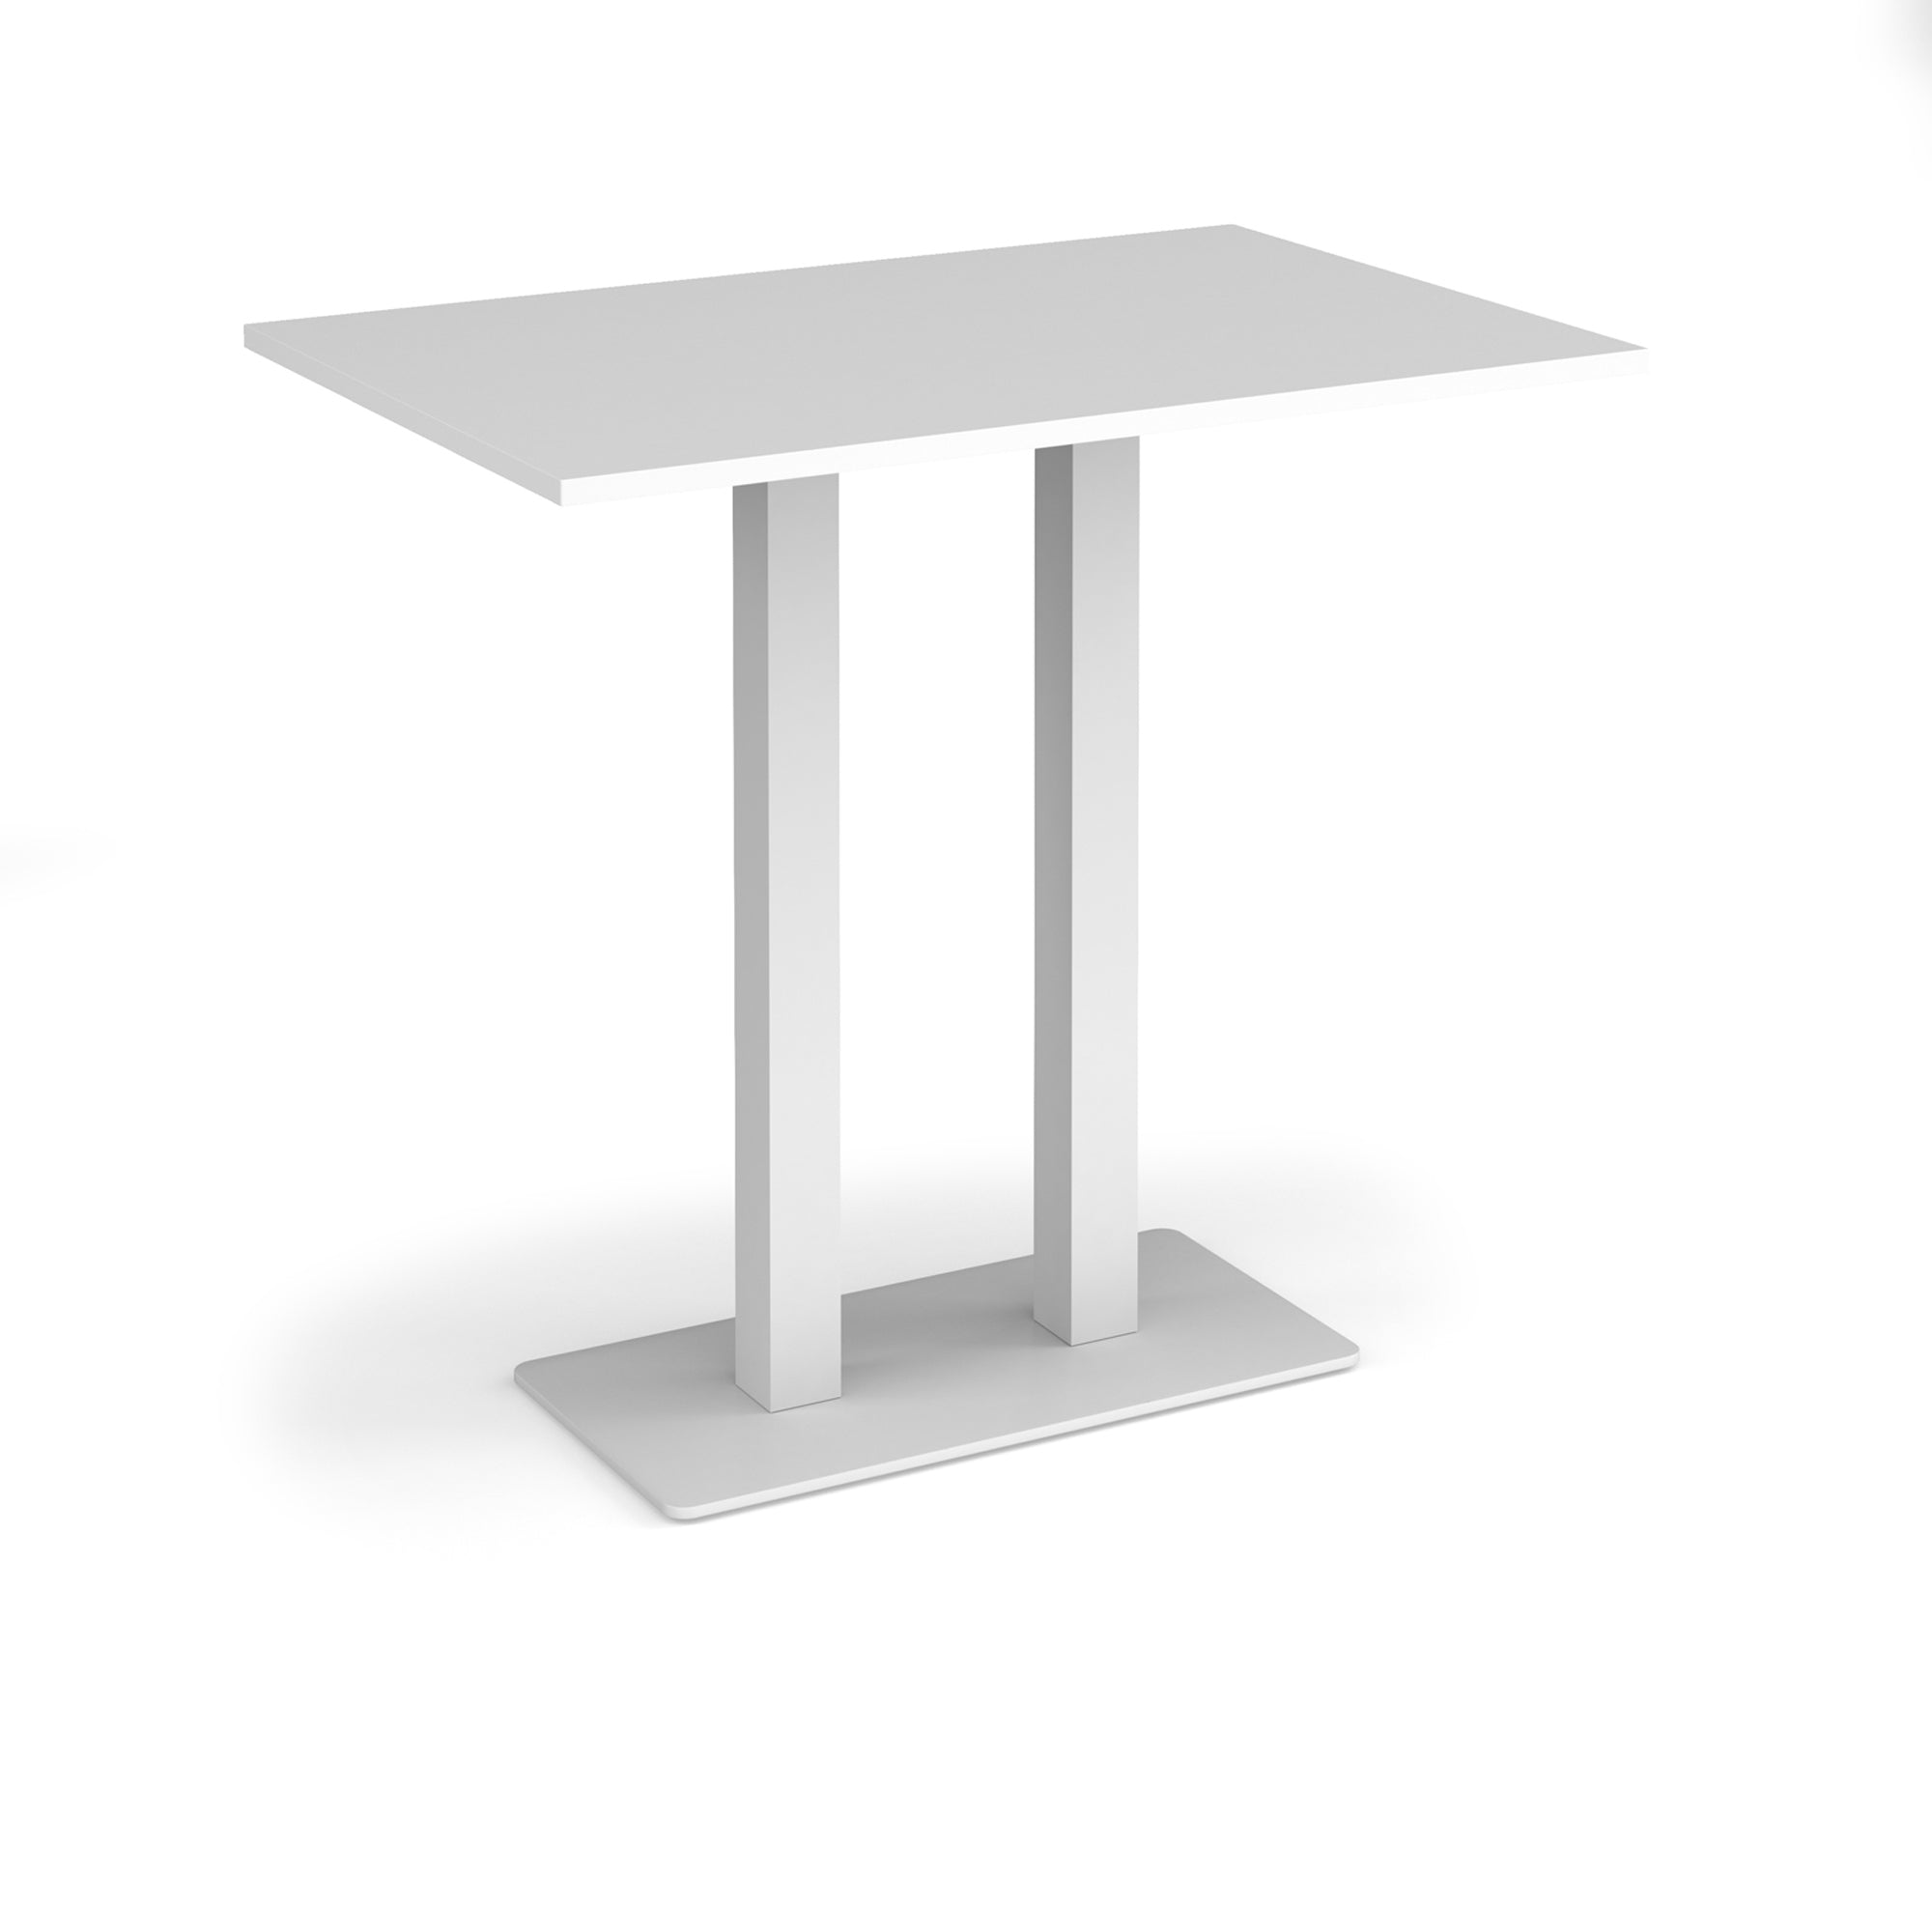 Eros rectangular poseur table - Office Products Online